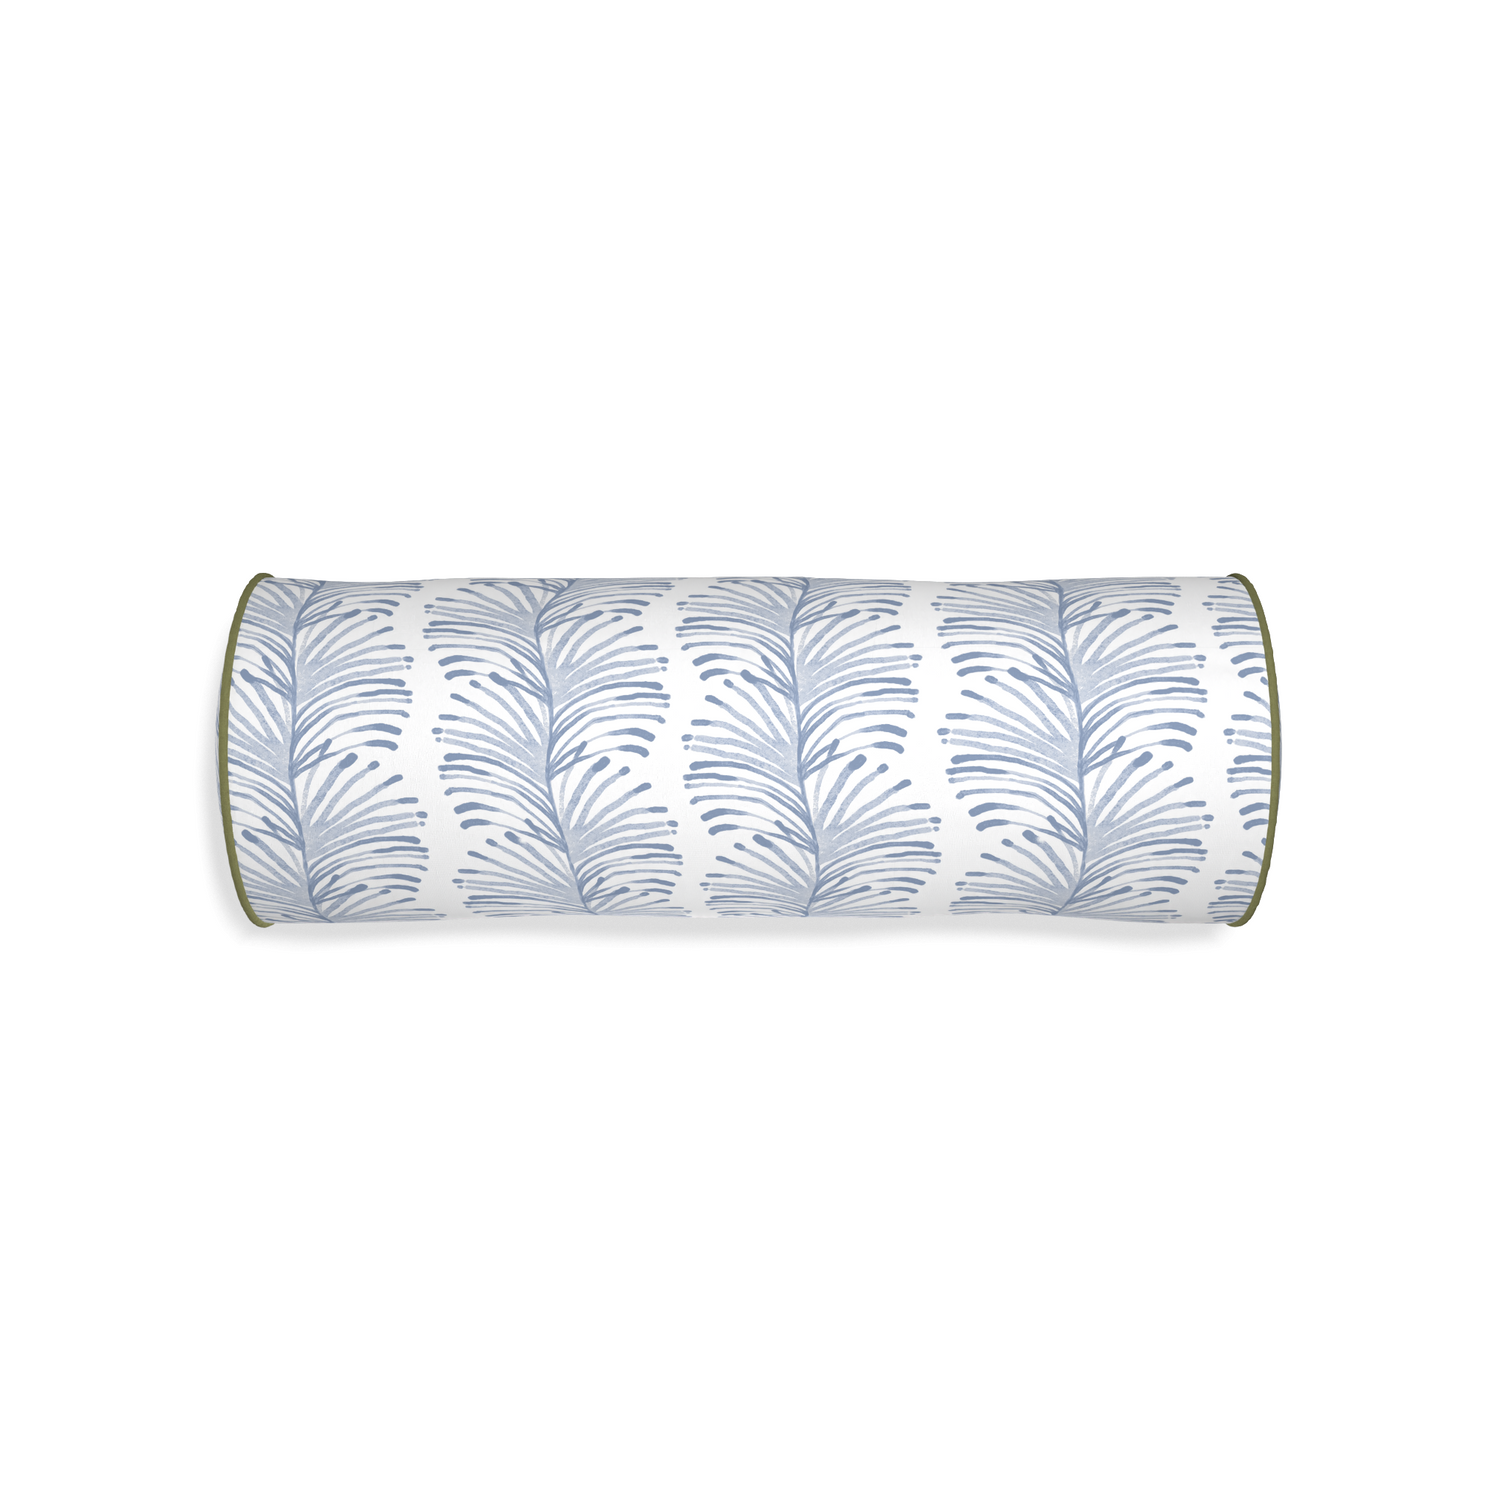 Bolster emma sky custom sky blue botanical stripepillow with moss piping on white background